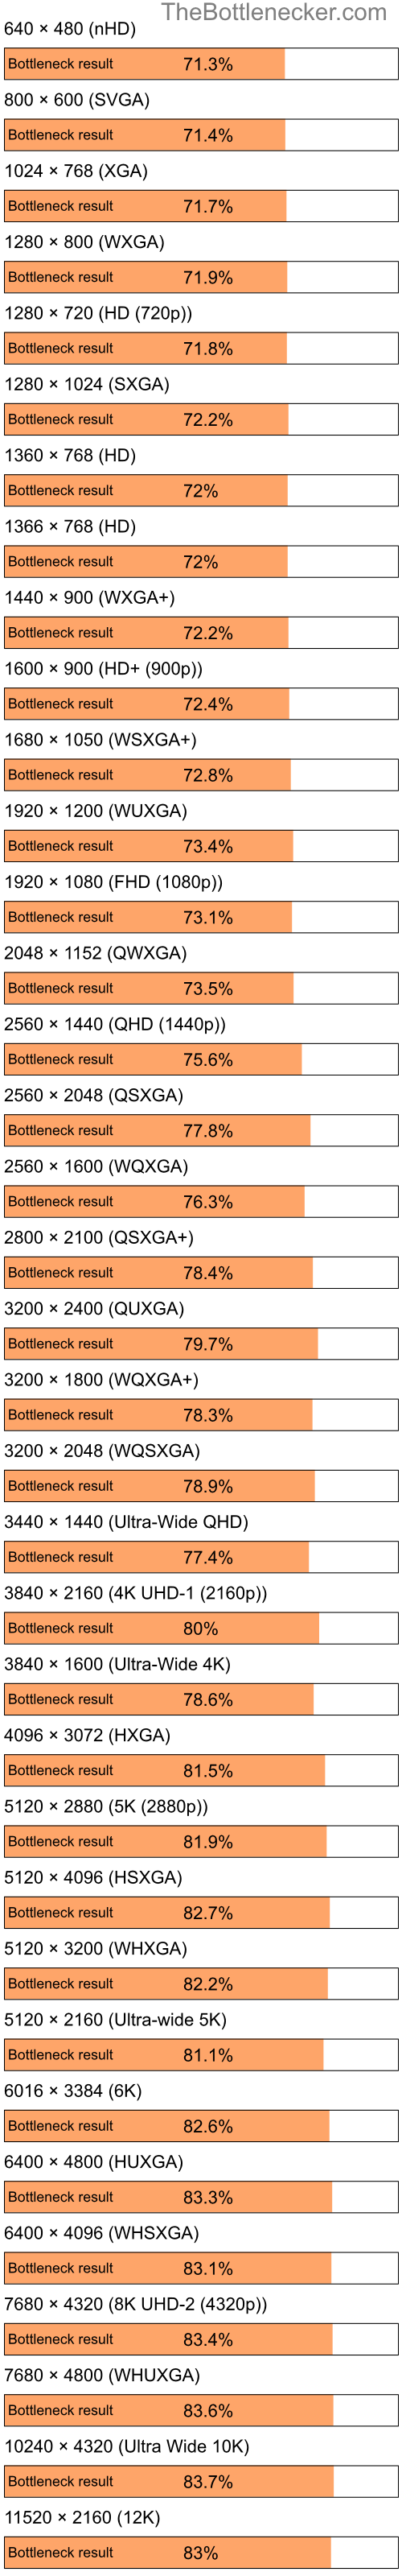 Bottleneck results by resolution for Intel Pentium 4 and AMD Mobility Radeon HD 4200 in Graphic Card Intense Tasks